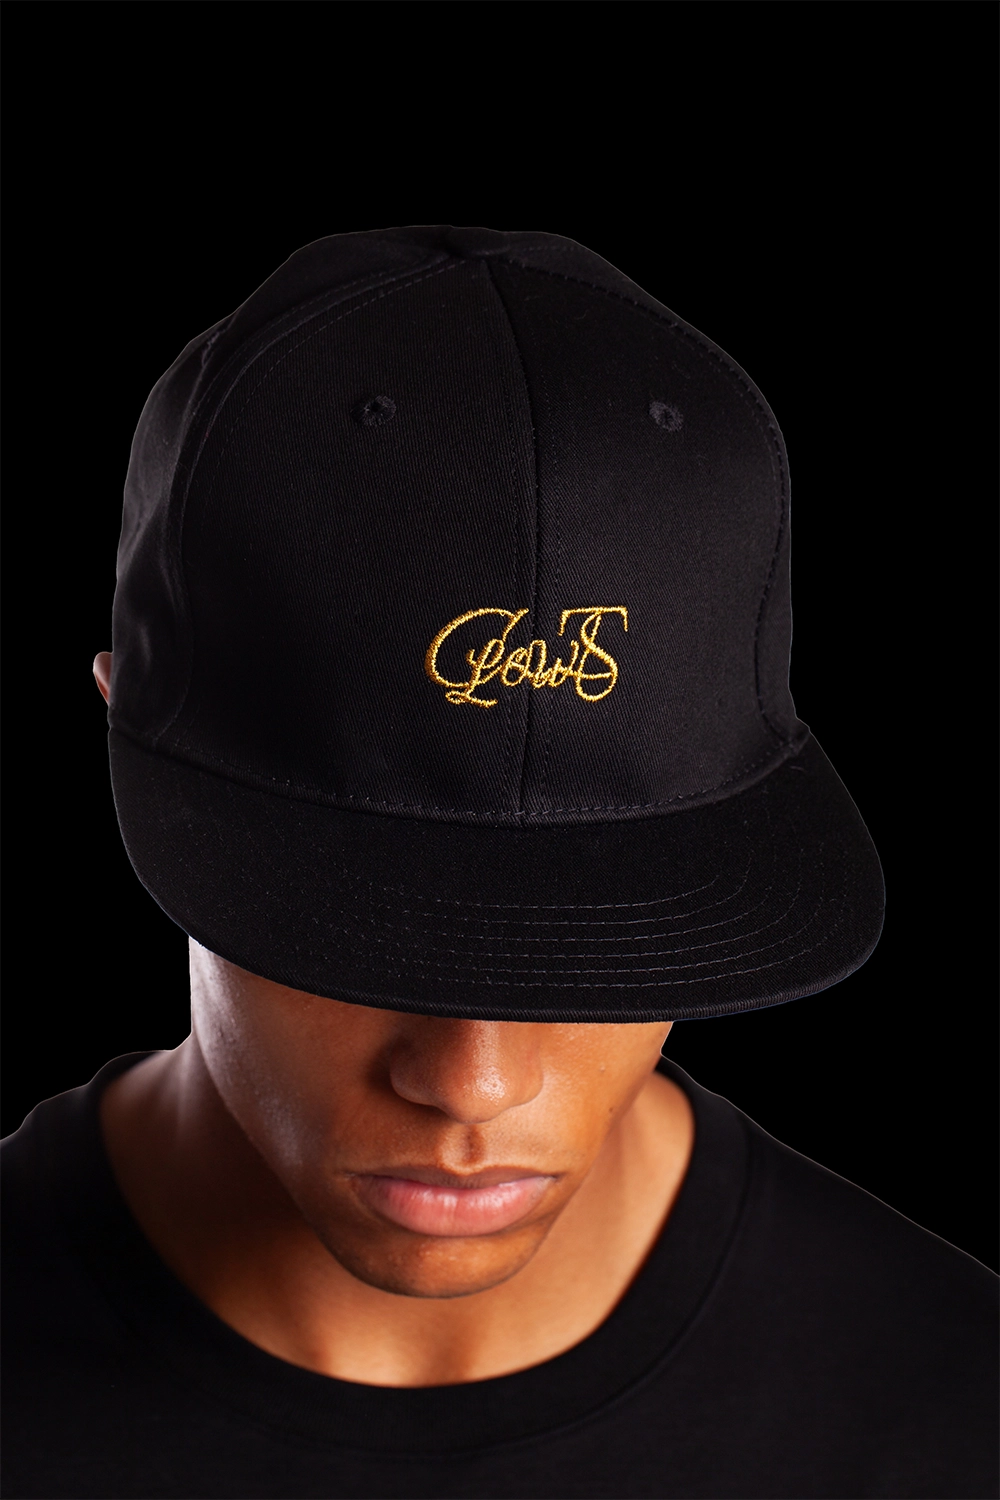 Black baseball cap embroidered with the worlds finest Piana Clerico 24-carat gold thread- made exclusively in Italy designed in Ireland